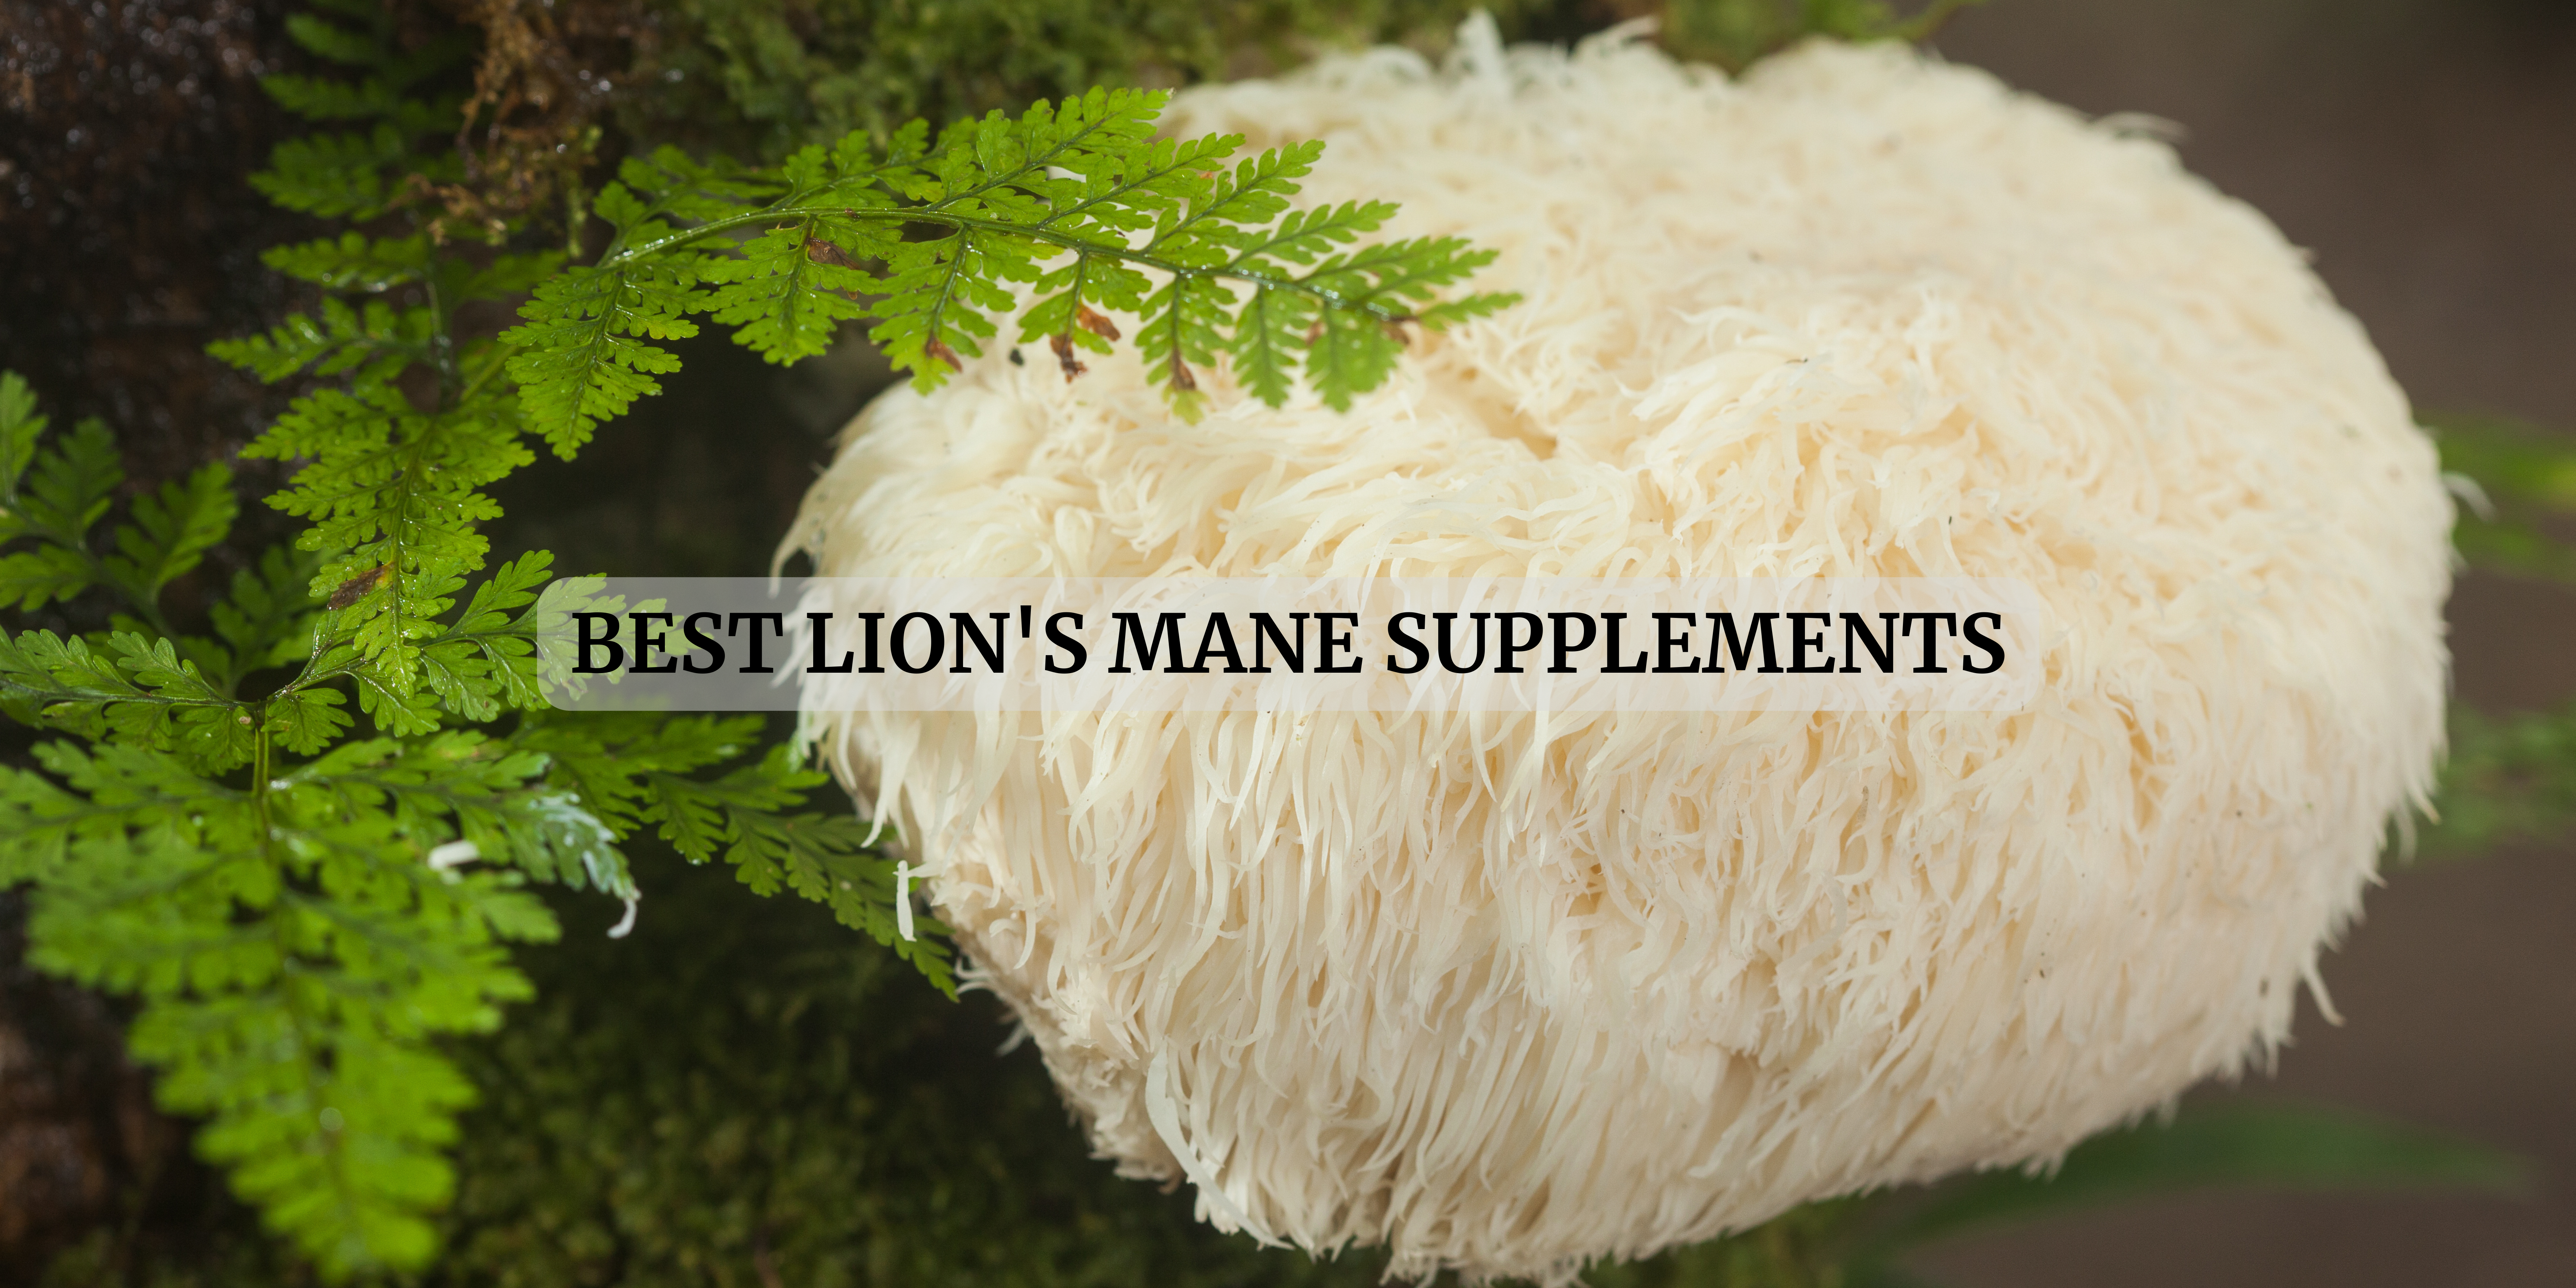 lion's mane supplements in India